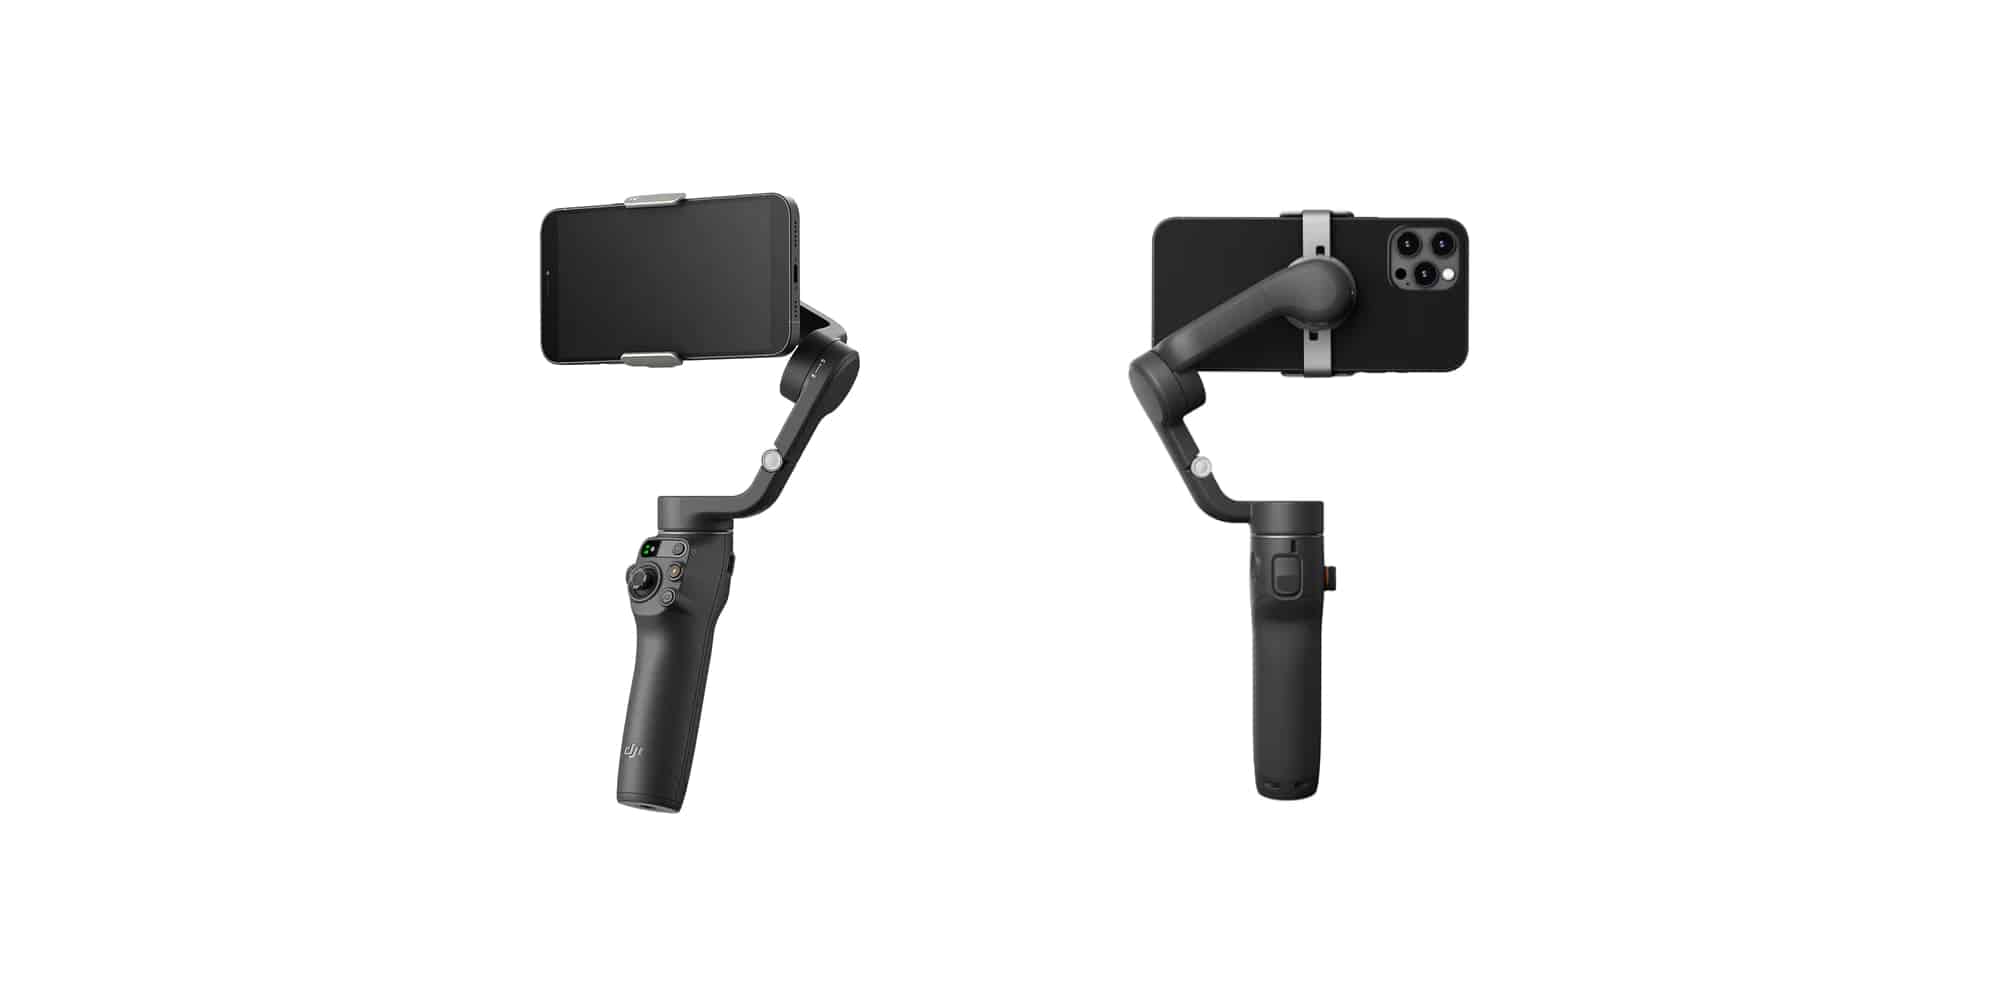 DJI Osmo Mobile 6 front and rear